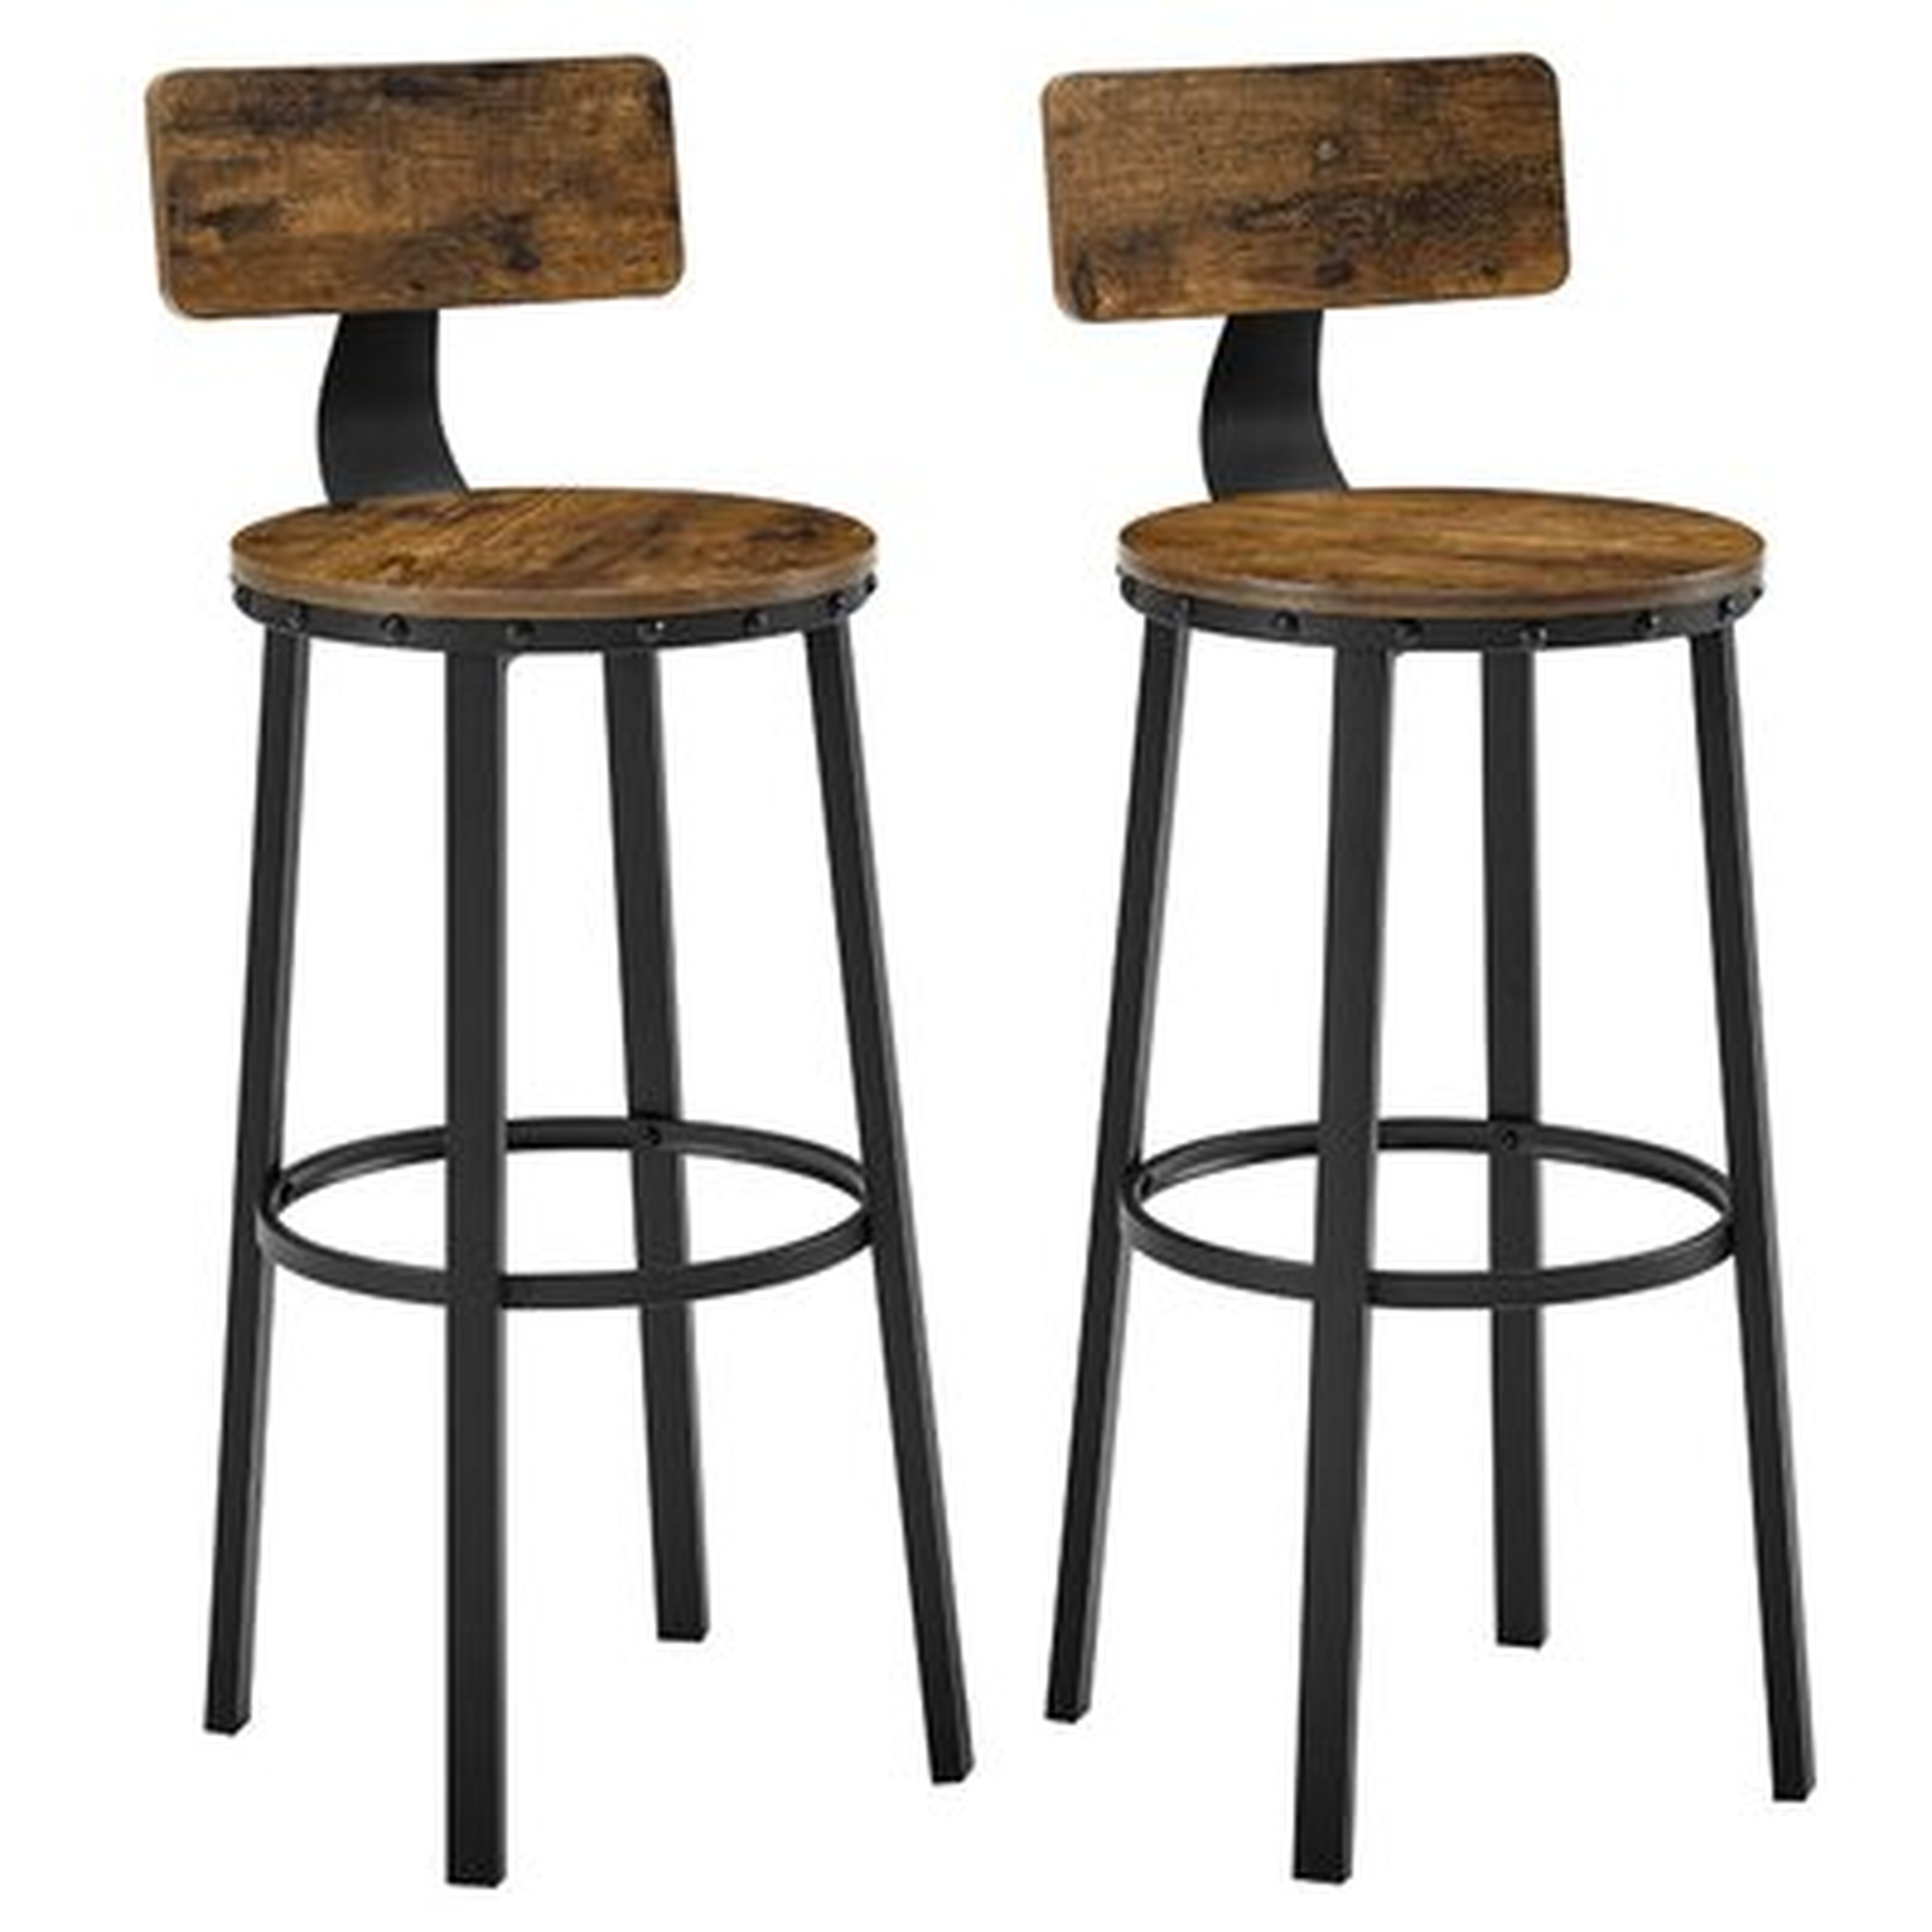 Bar Stools, Tall Bar Chairs With Backrest, Set Of 2 Kitchen Stools, Heavy-duty Steel Frame, 28.8-inch High, Easy Assembly, Industrial, Rustic Brown And Black - Wayfair